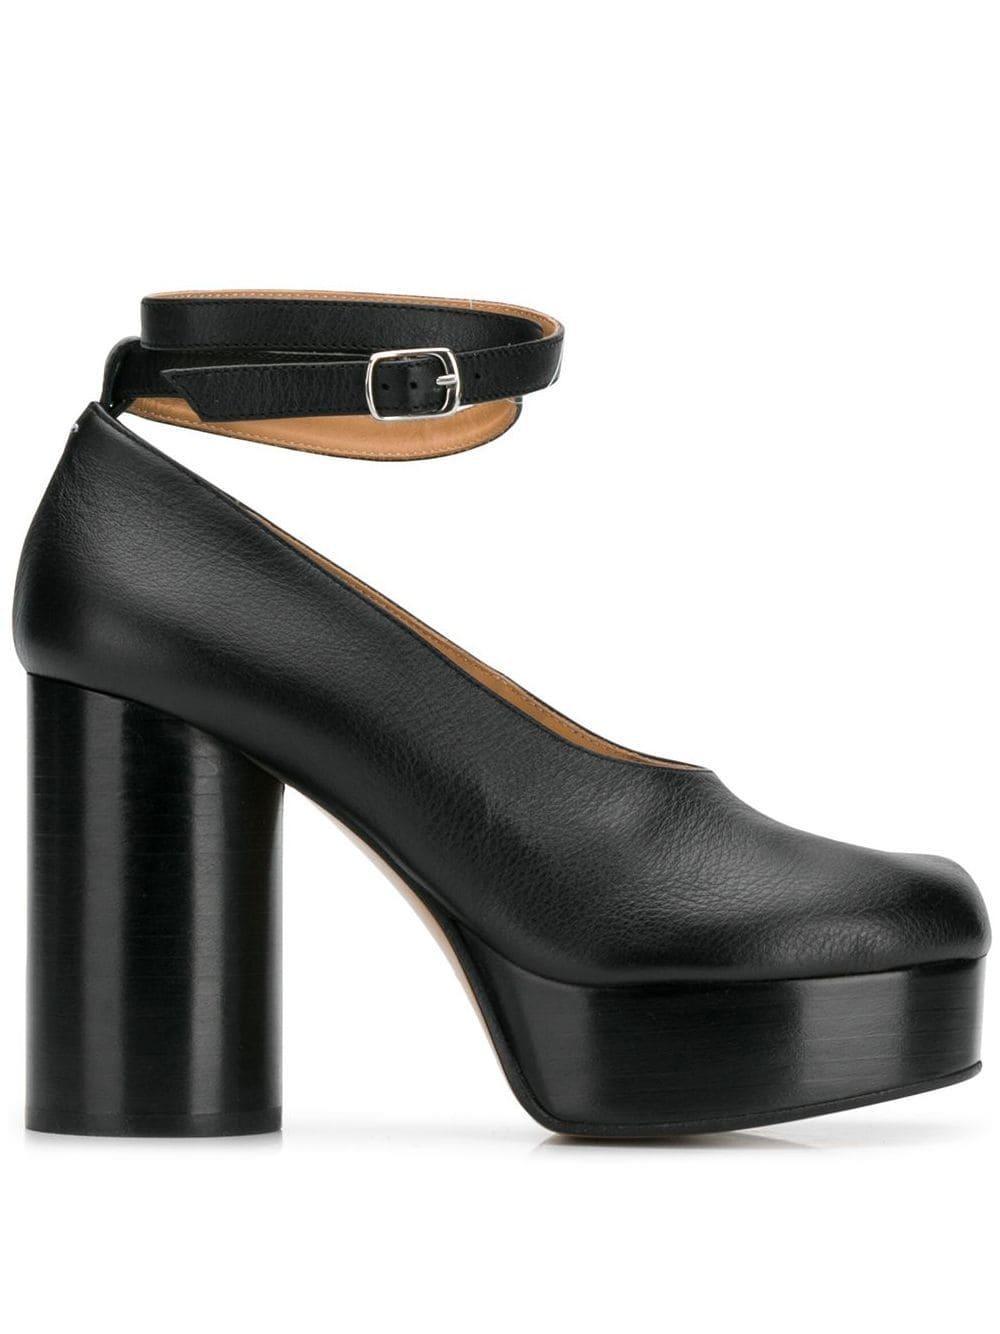 Maison Margiela Leather Tabi Double Strap Pumps in Black - Save 33% - Lyst